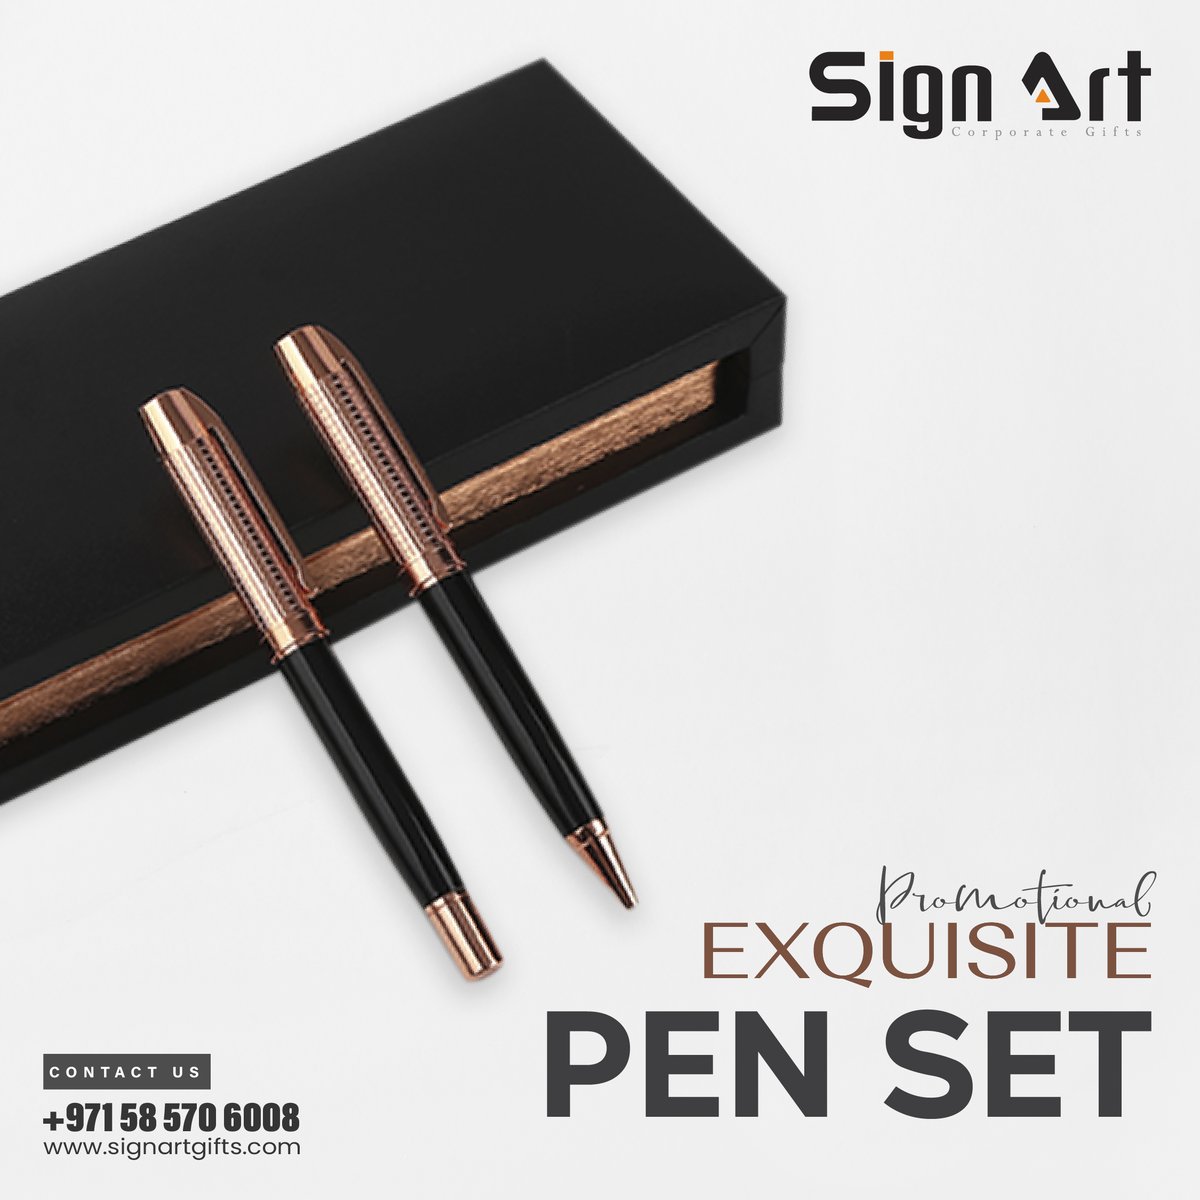 EXQUISITE PEN SET
WhatsApp: 058 570 6008

Learn more: signartgifts.com

#customized #customizedgifts #promotionalproducts #personalizedgifts #giftprinting #penset #corporategifts #UVProtection #MetalPen #CustomizedBranding #printingservices #dubaiprinting #giftsupplier